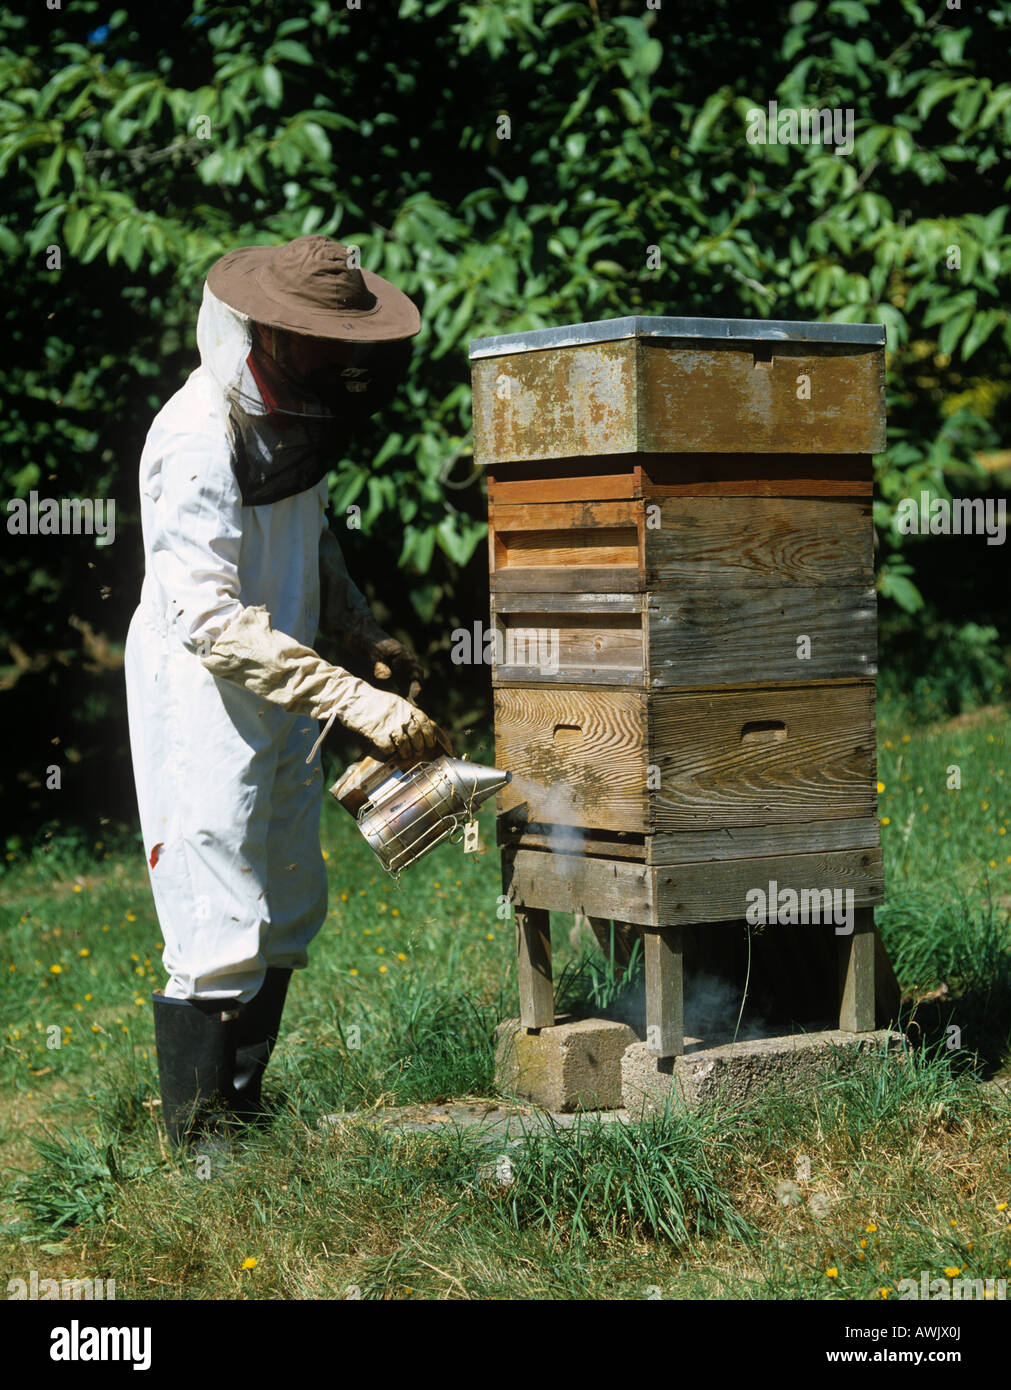 Beekeeper smoking across entrance to honey bee hive to calm the bees Stock Photo